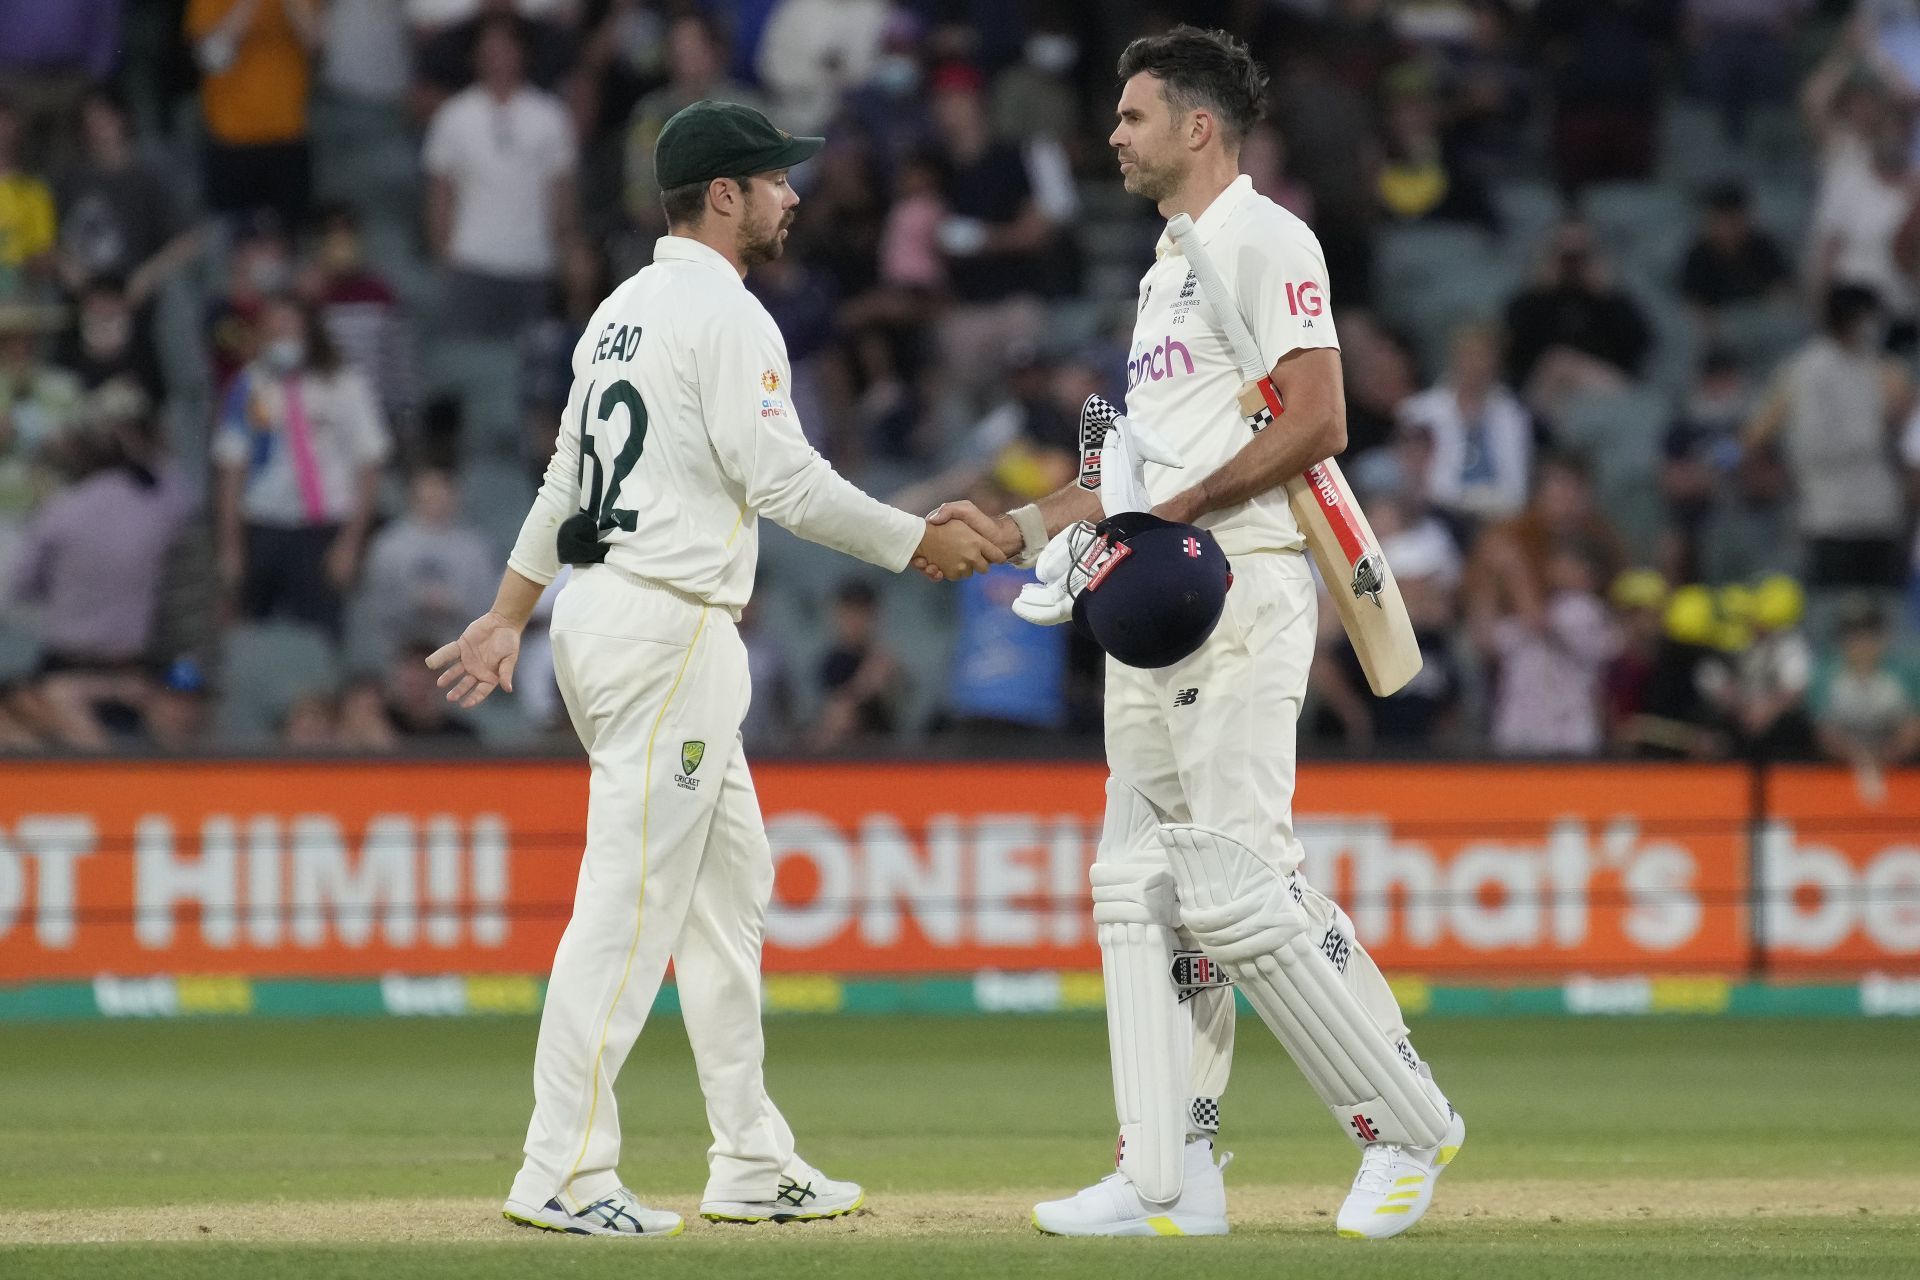 Australia beat England by 275 runs in the pink-ball Test at Adelaide Oval